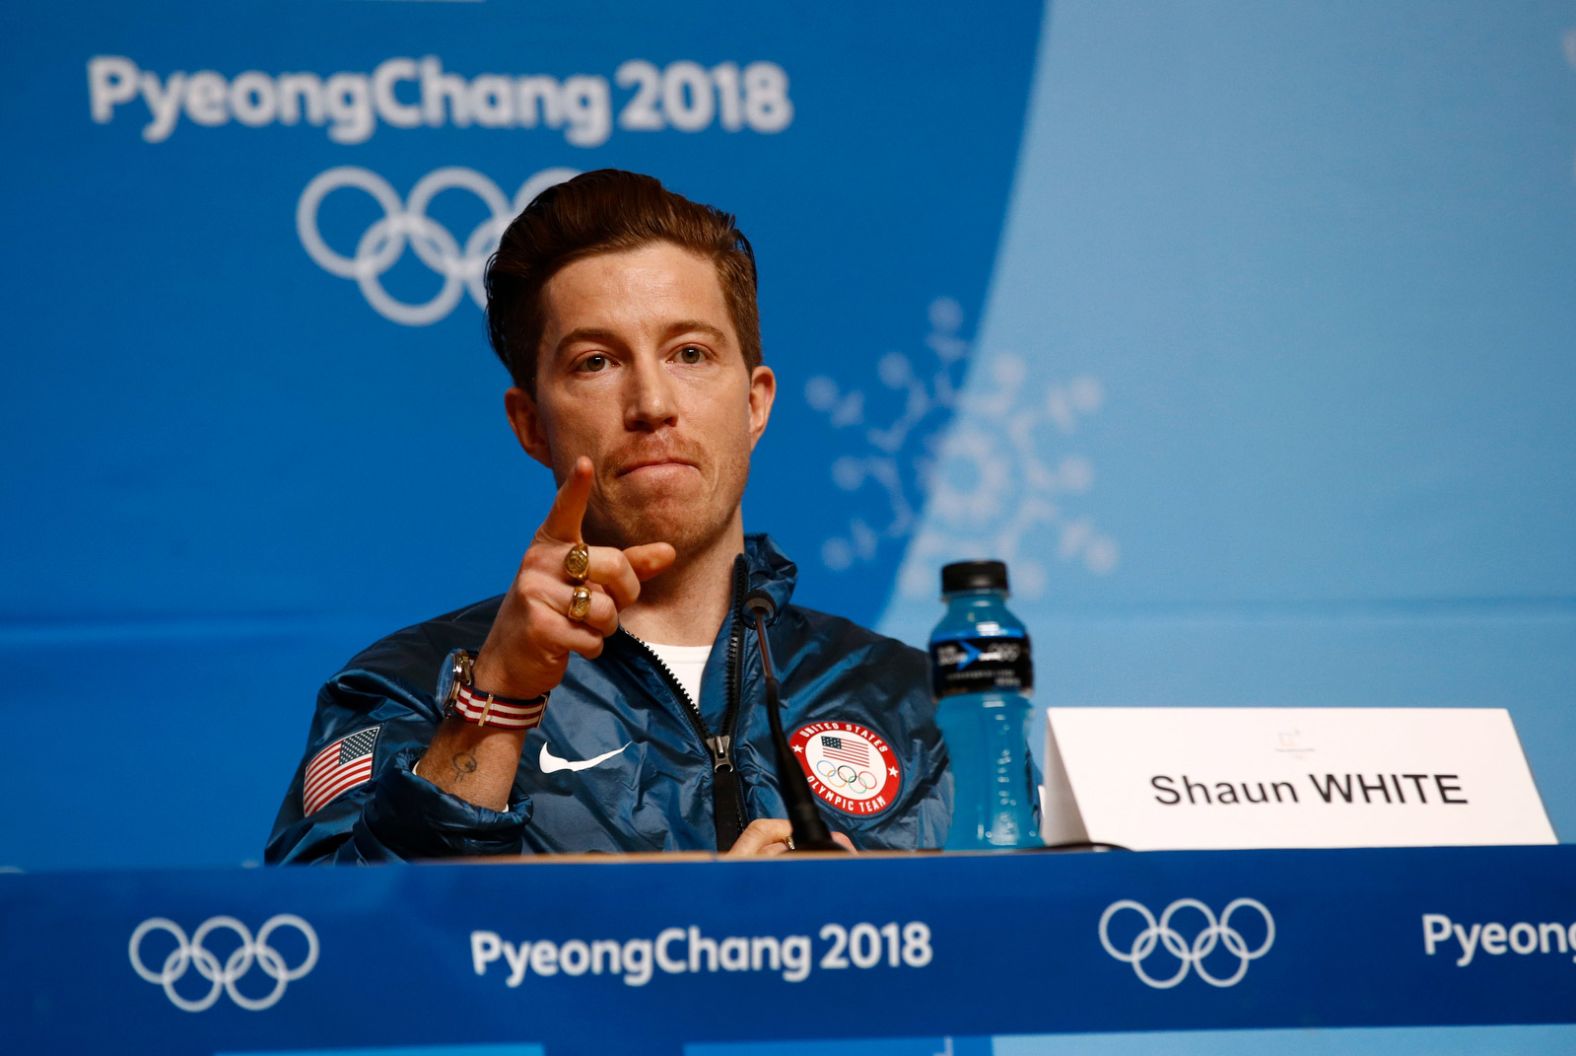 During a news conference after his 2018 Olympic win, <a href="https://www.cnn.com/2018/02/14/sport/shaun-white-allegations-intl/index.html" target="_blank">White called past sexual-harassment allegations levied against him "gossip."</a> White had previously admitted to sending lewd text messages to Lena Zawaideh, the former drummer of his band, in 2016, and the parties later reached an undisclosed settlement.